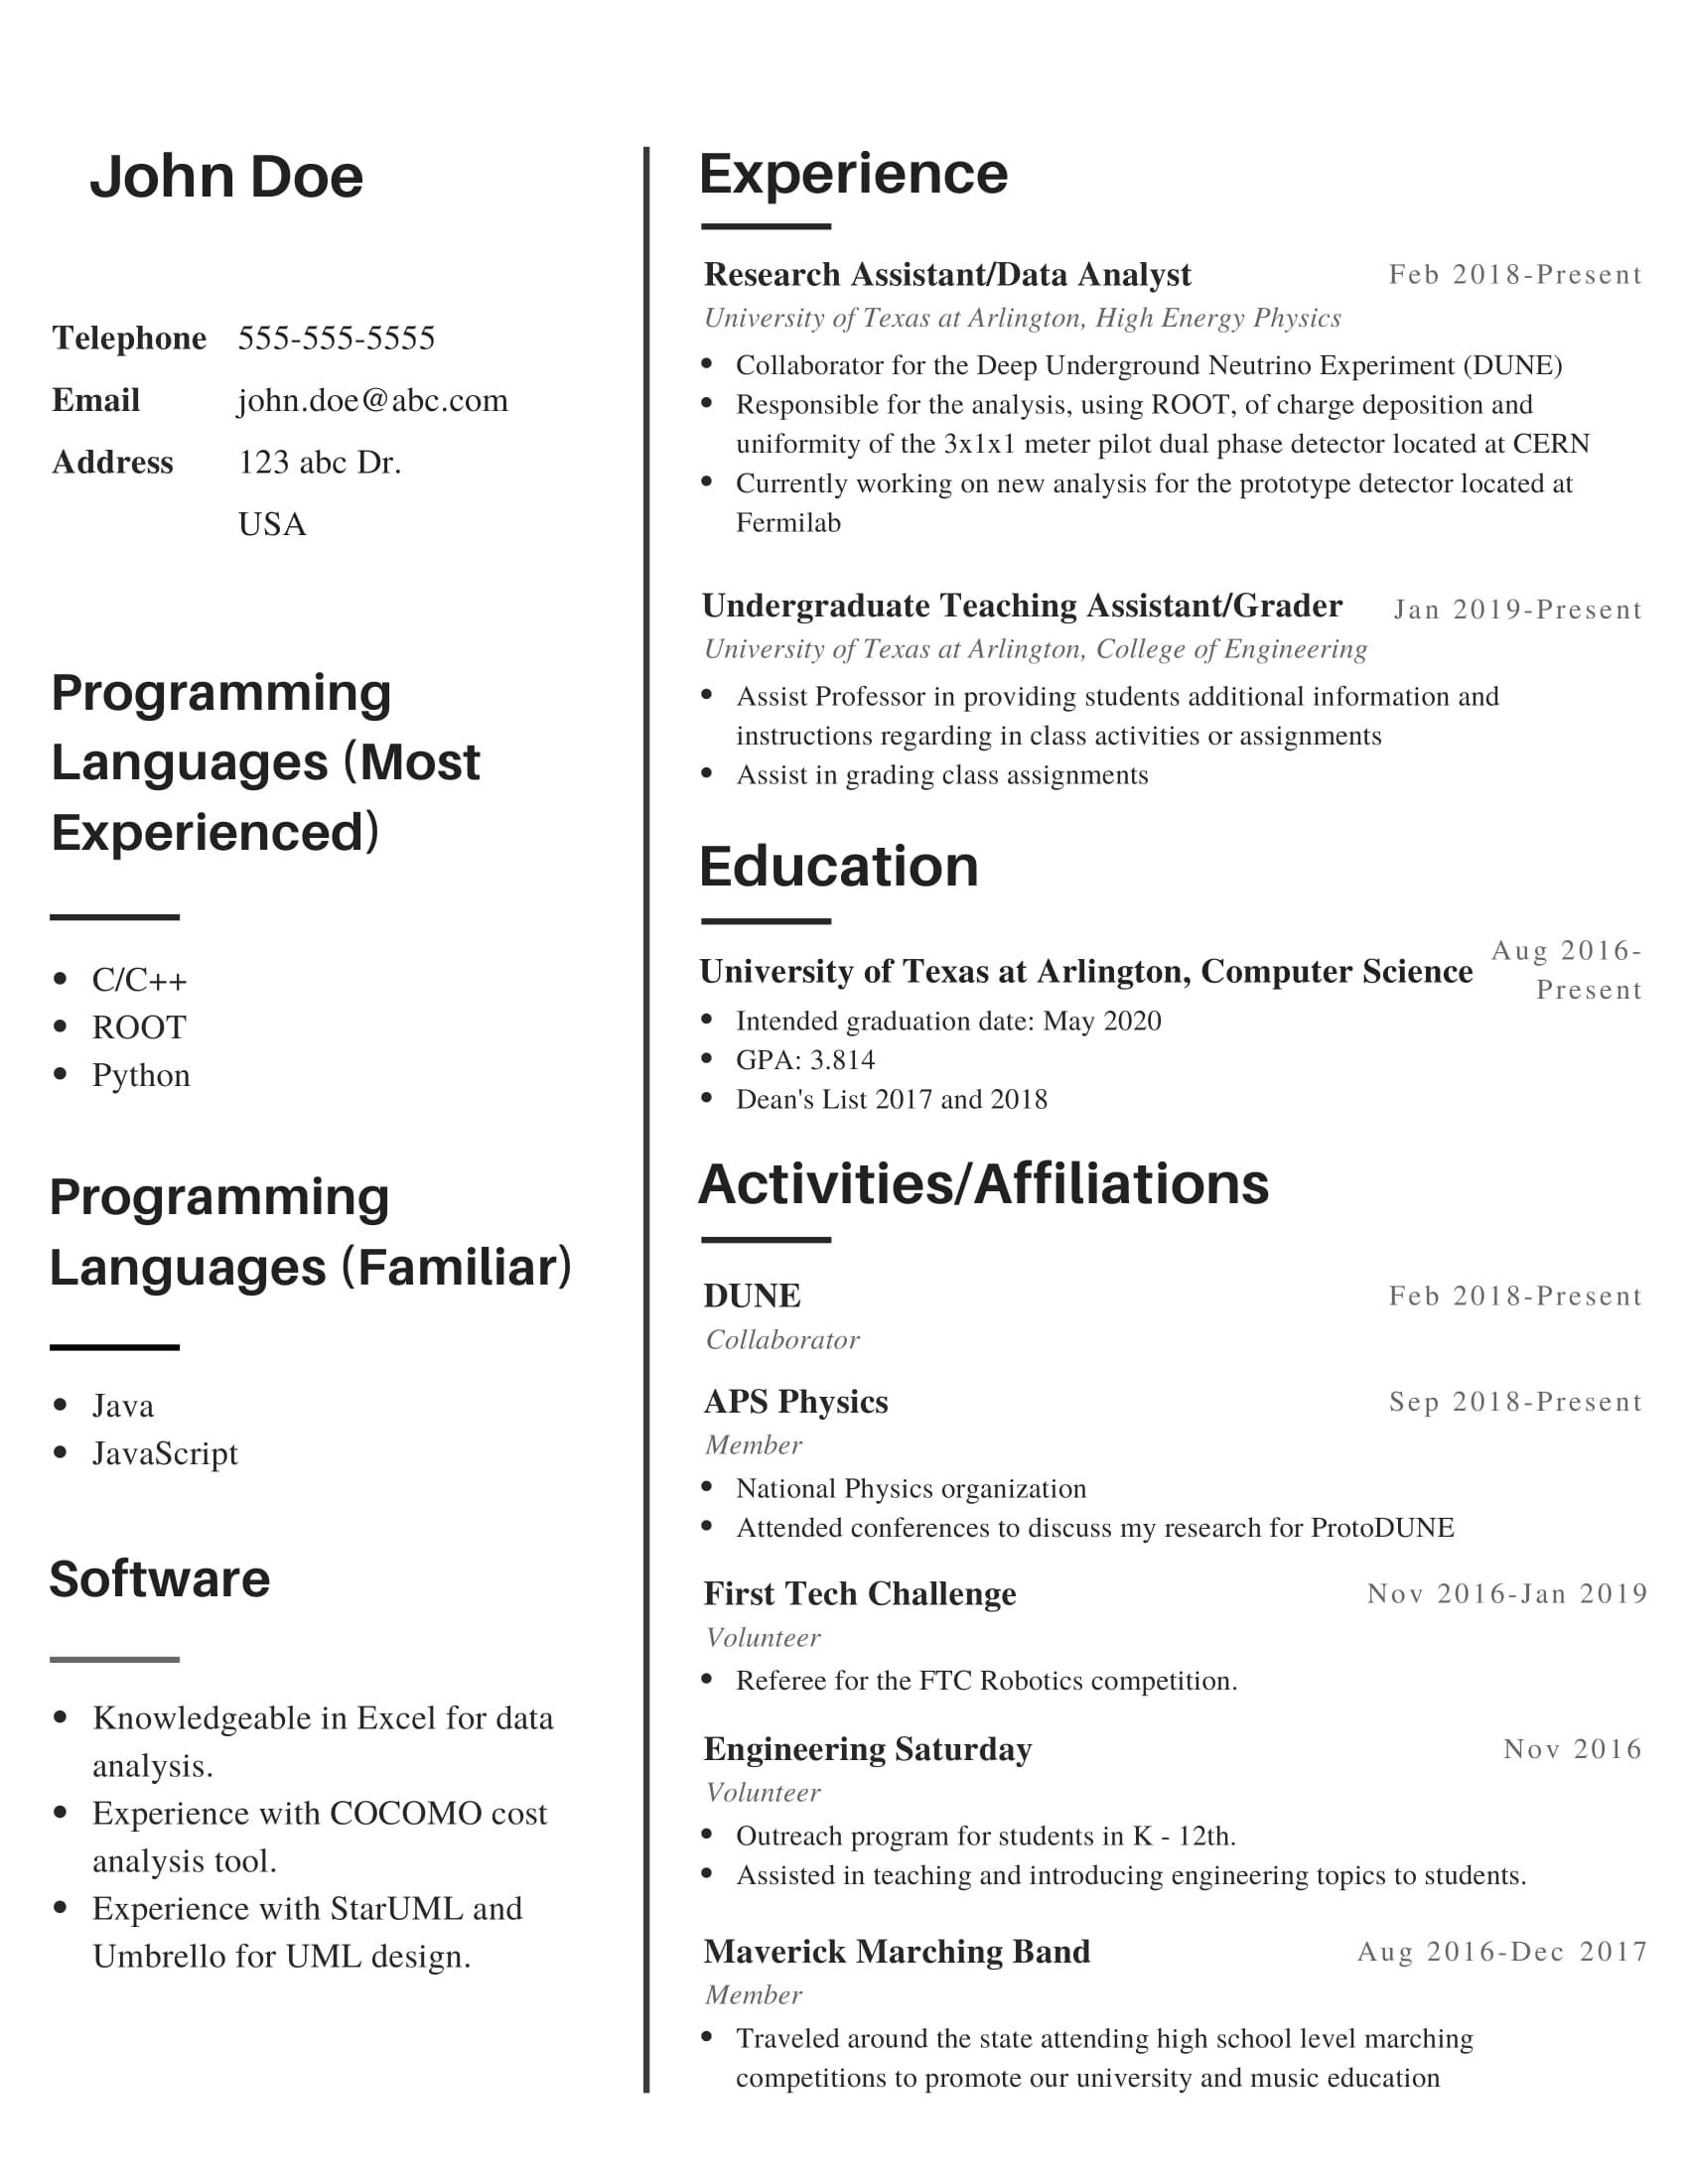 Sample Resume for Computer Science Fresh Graduate Reddit Computer Science Student, Looking for Advice On Resume. : R/resumes